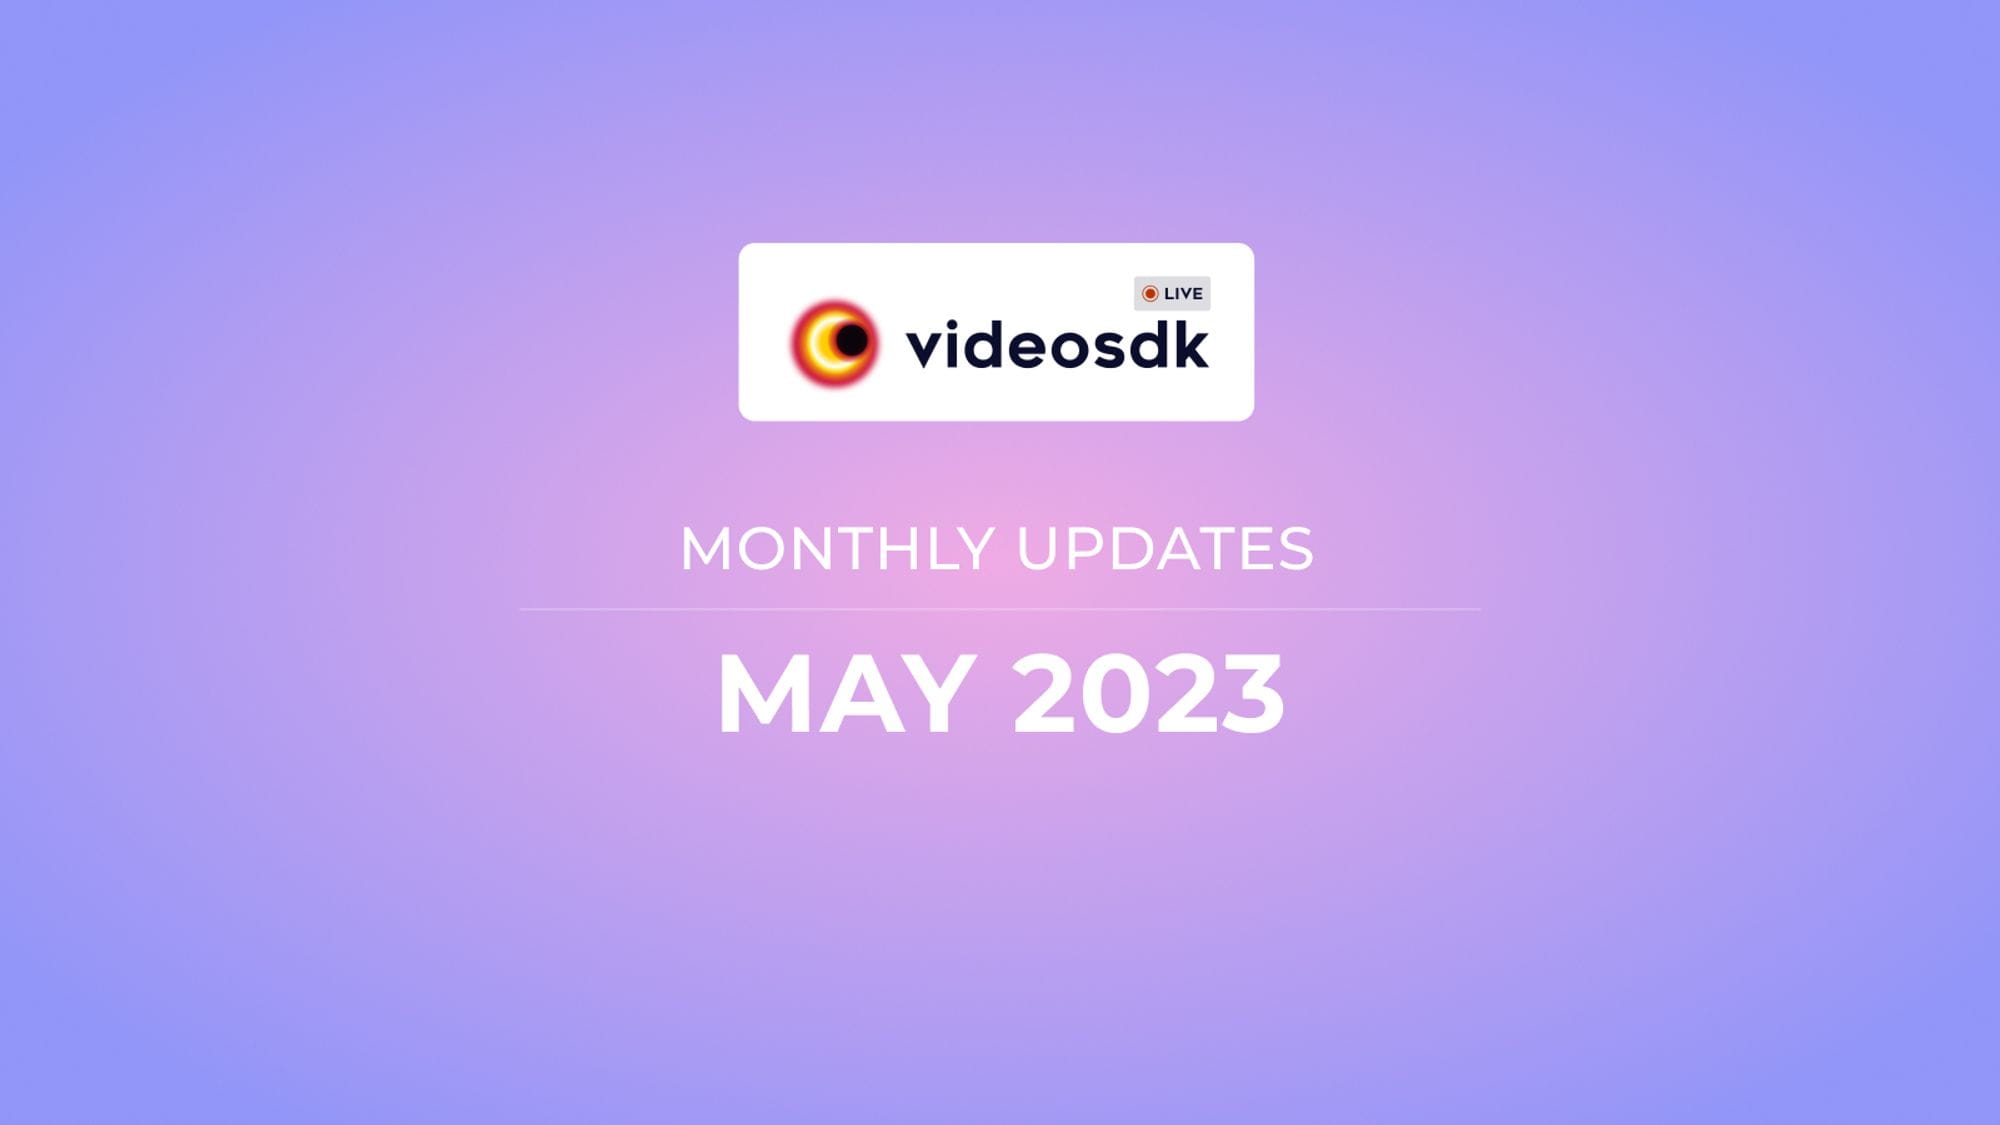 Video SDK May 23' Product Updates for Developers